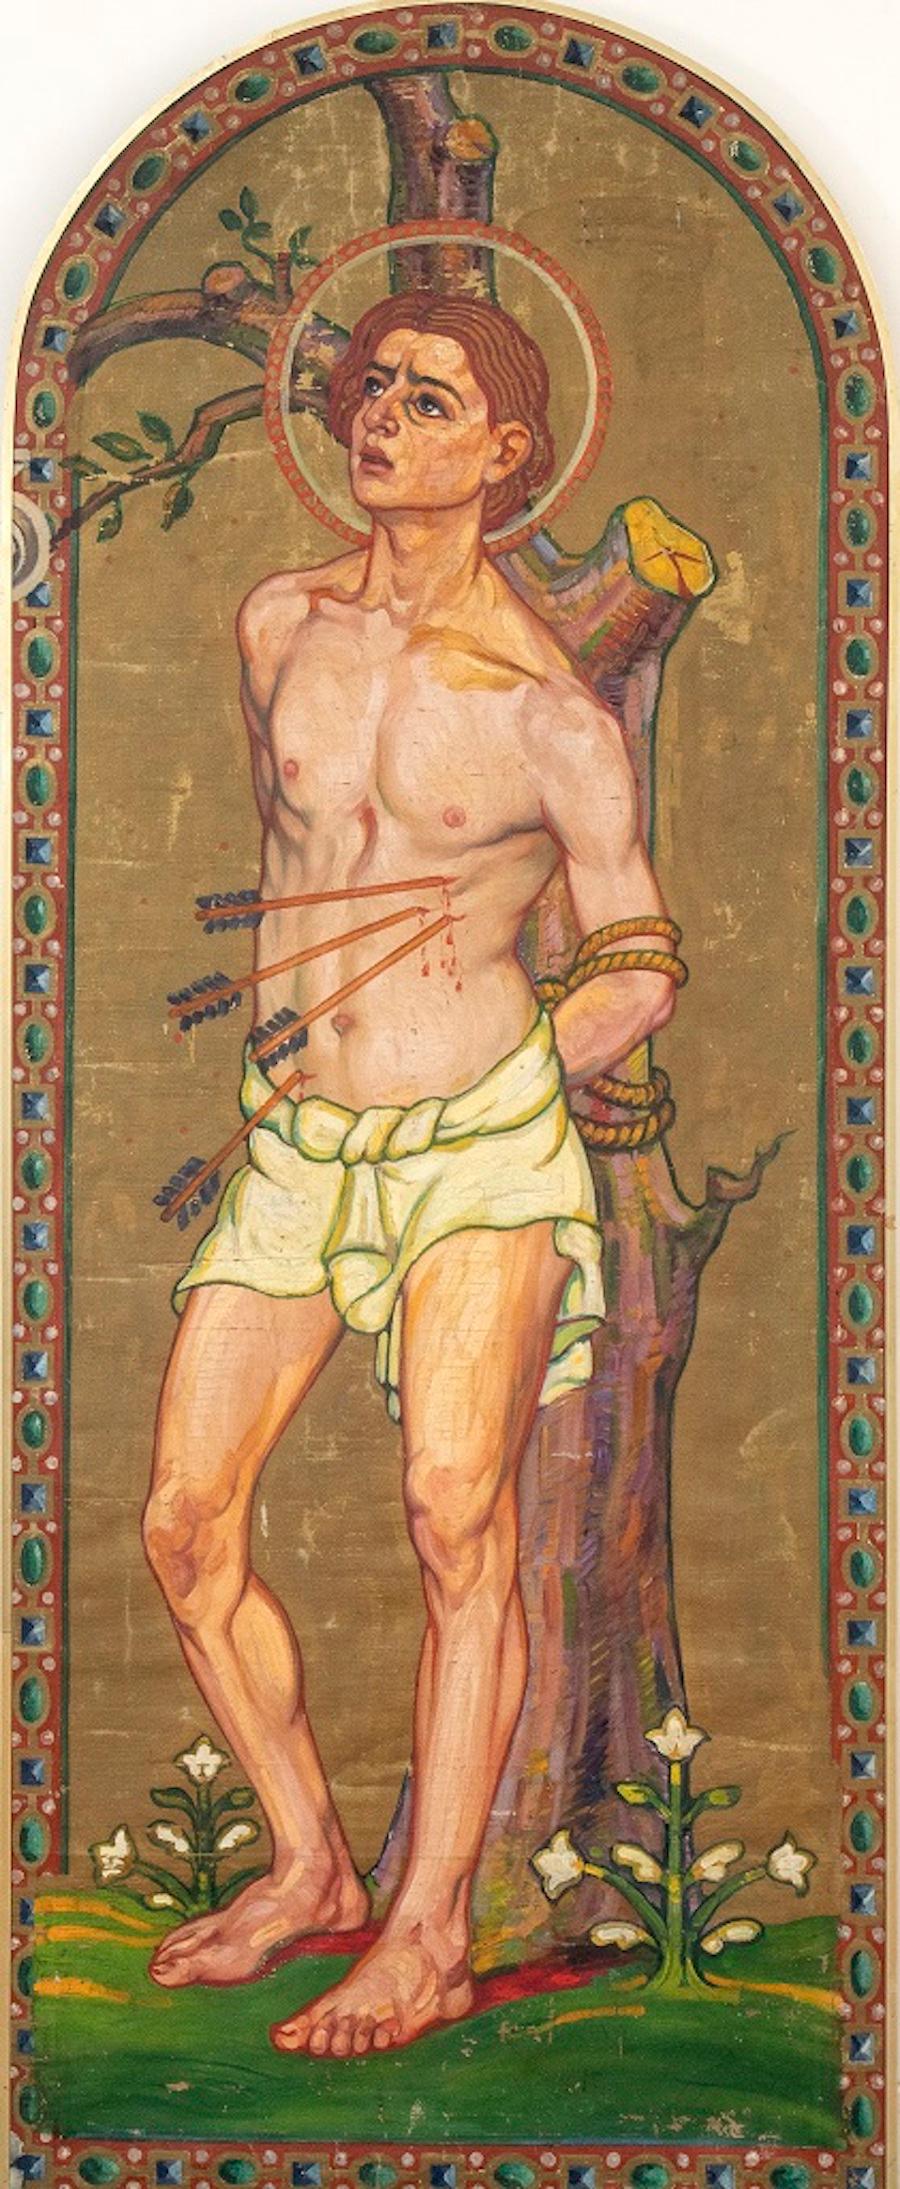 Unknown Figurative Painting - Saint Sebastian - Oil on Canvas by French Artist 20th Century